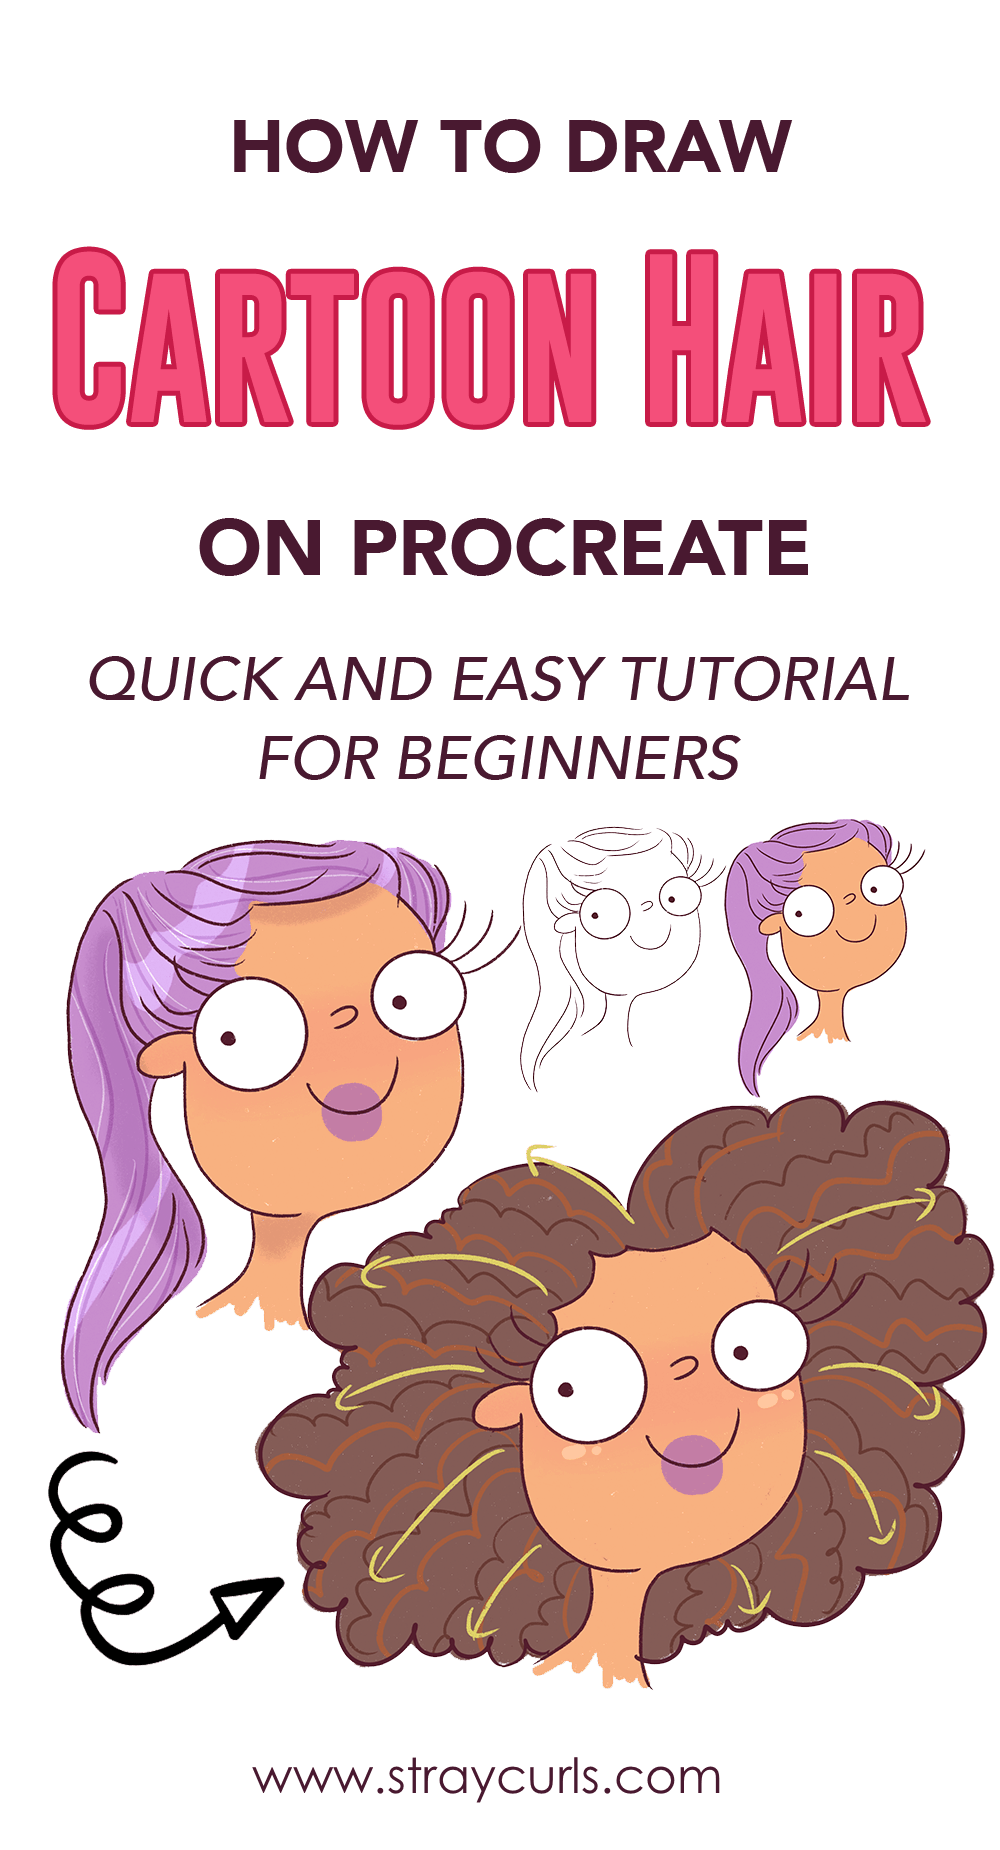 How to draw cartoon hair - an easy guide for beginners. Learn to draw straight hair and curly hair with this step-by-step guide.